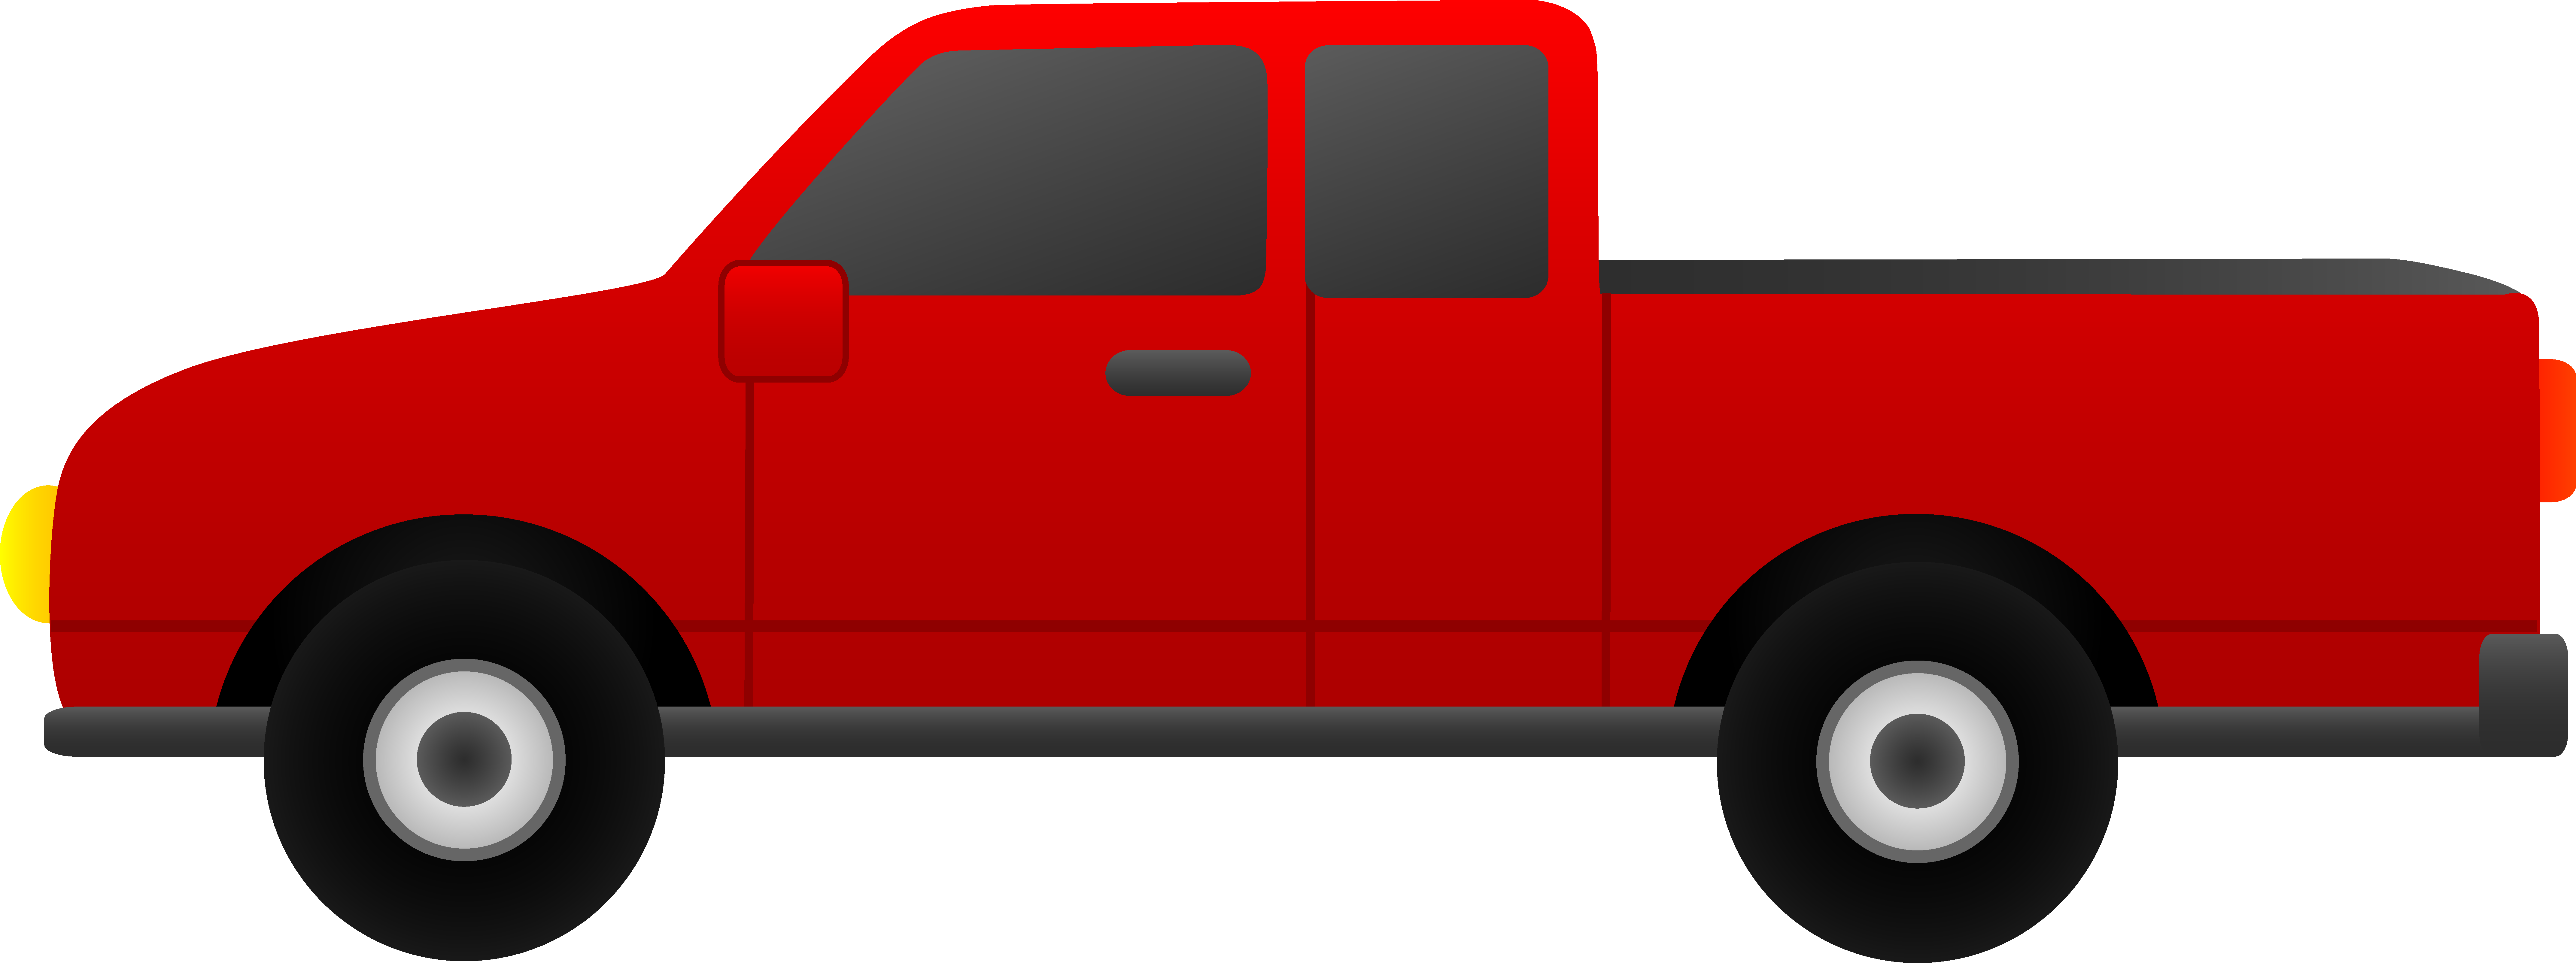 Pickup truck clipart black and white free